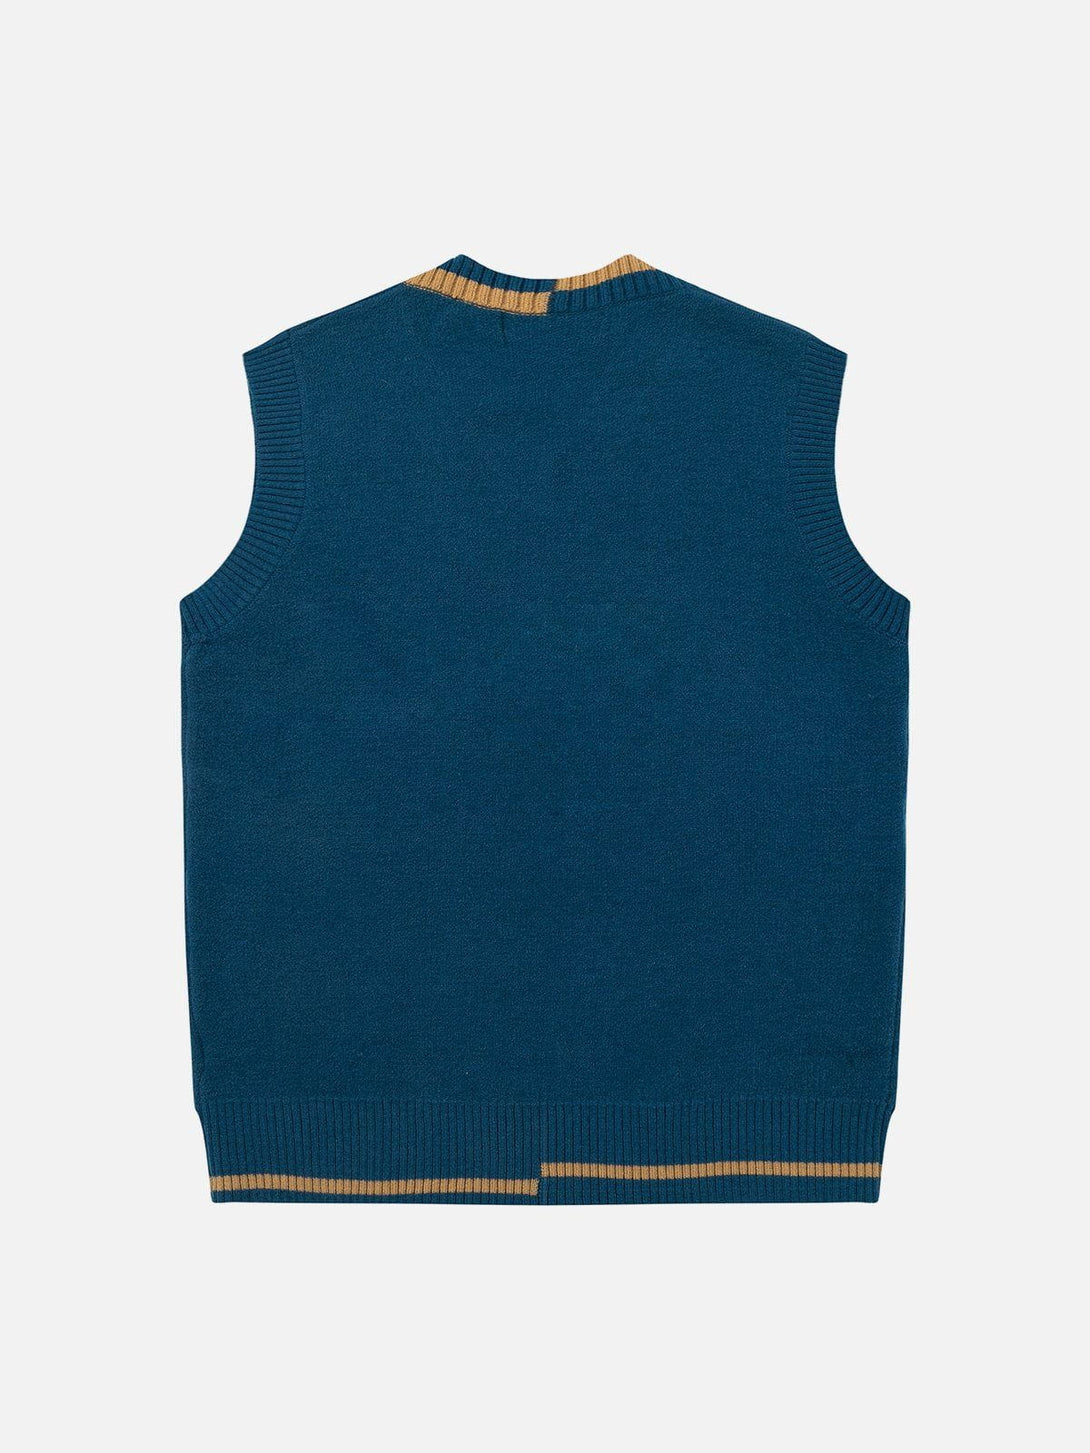 Levefly - WHOCULT Embroidery Sweater Vest - Streetwear Fashion - levefly.com